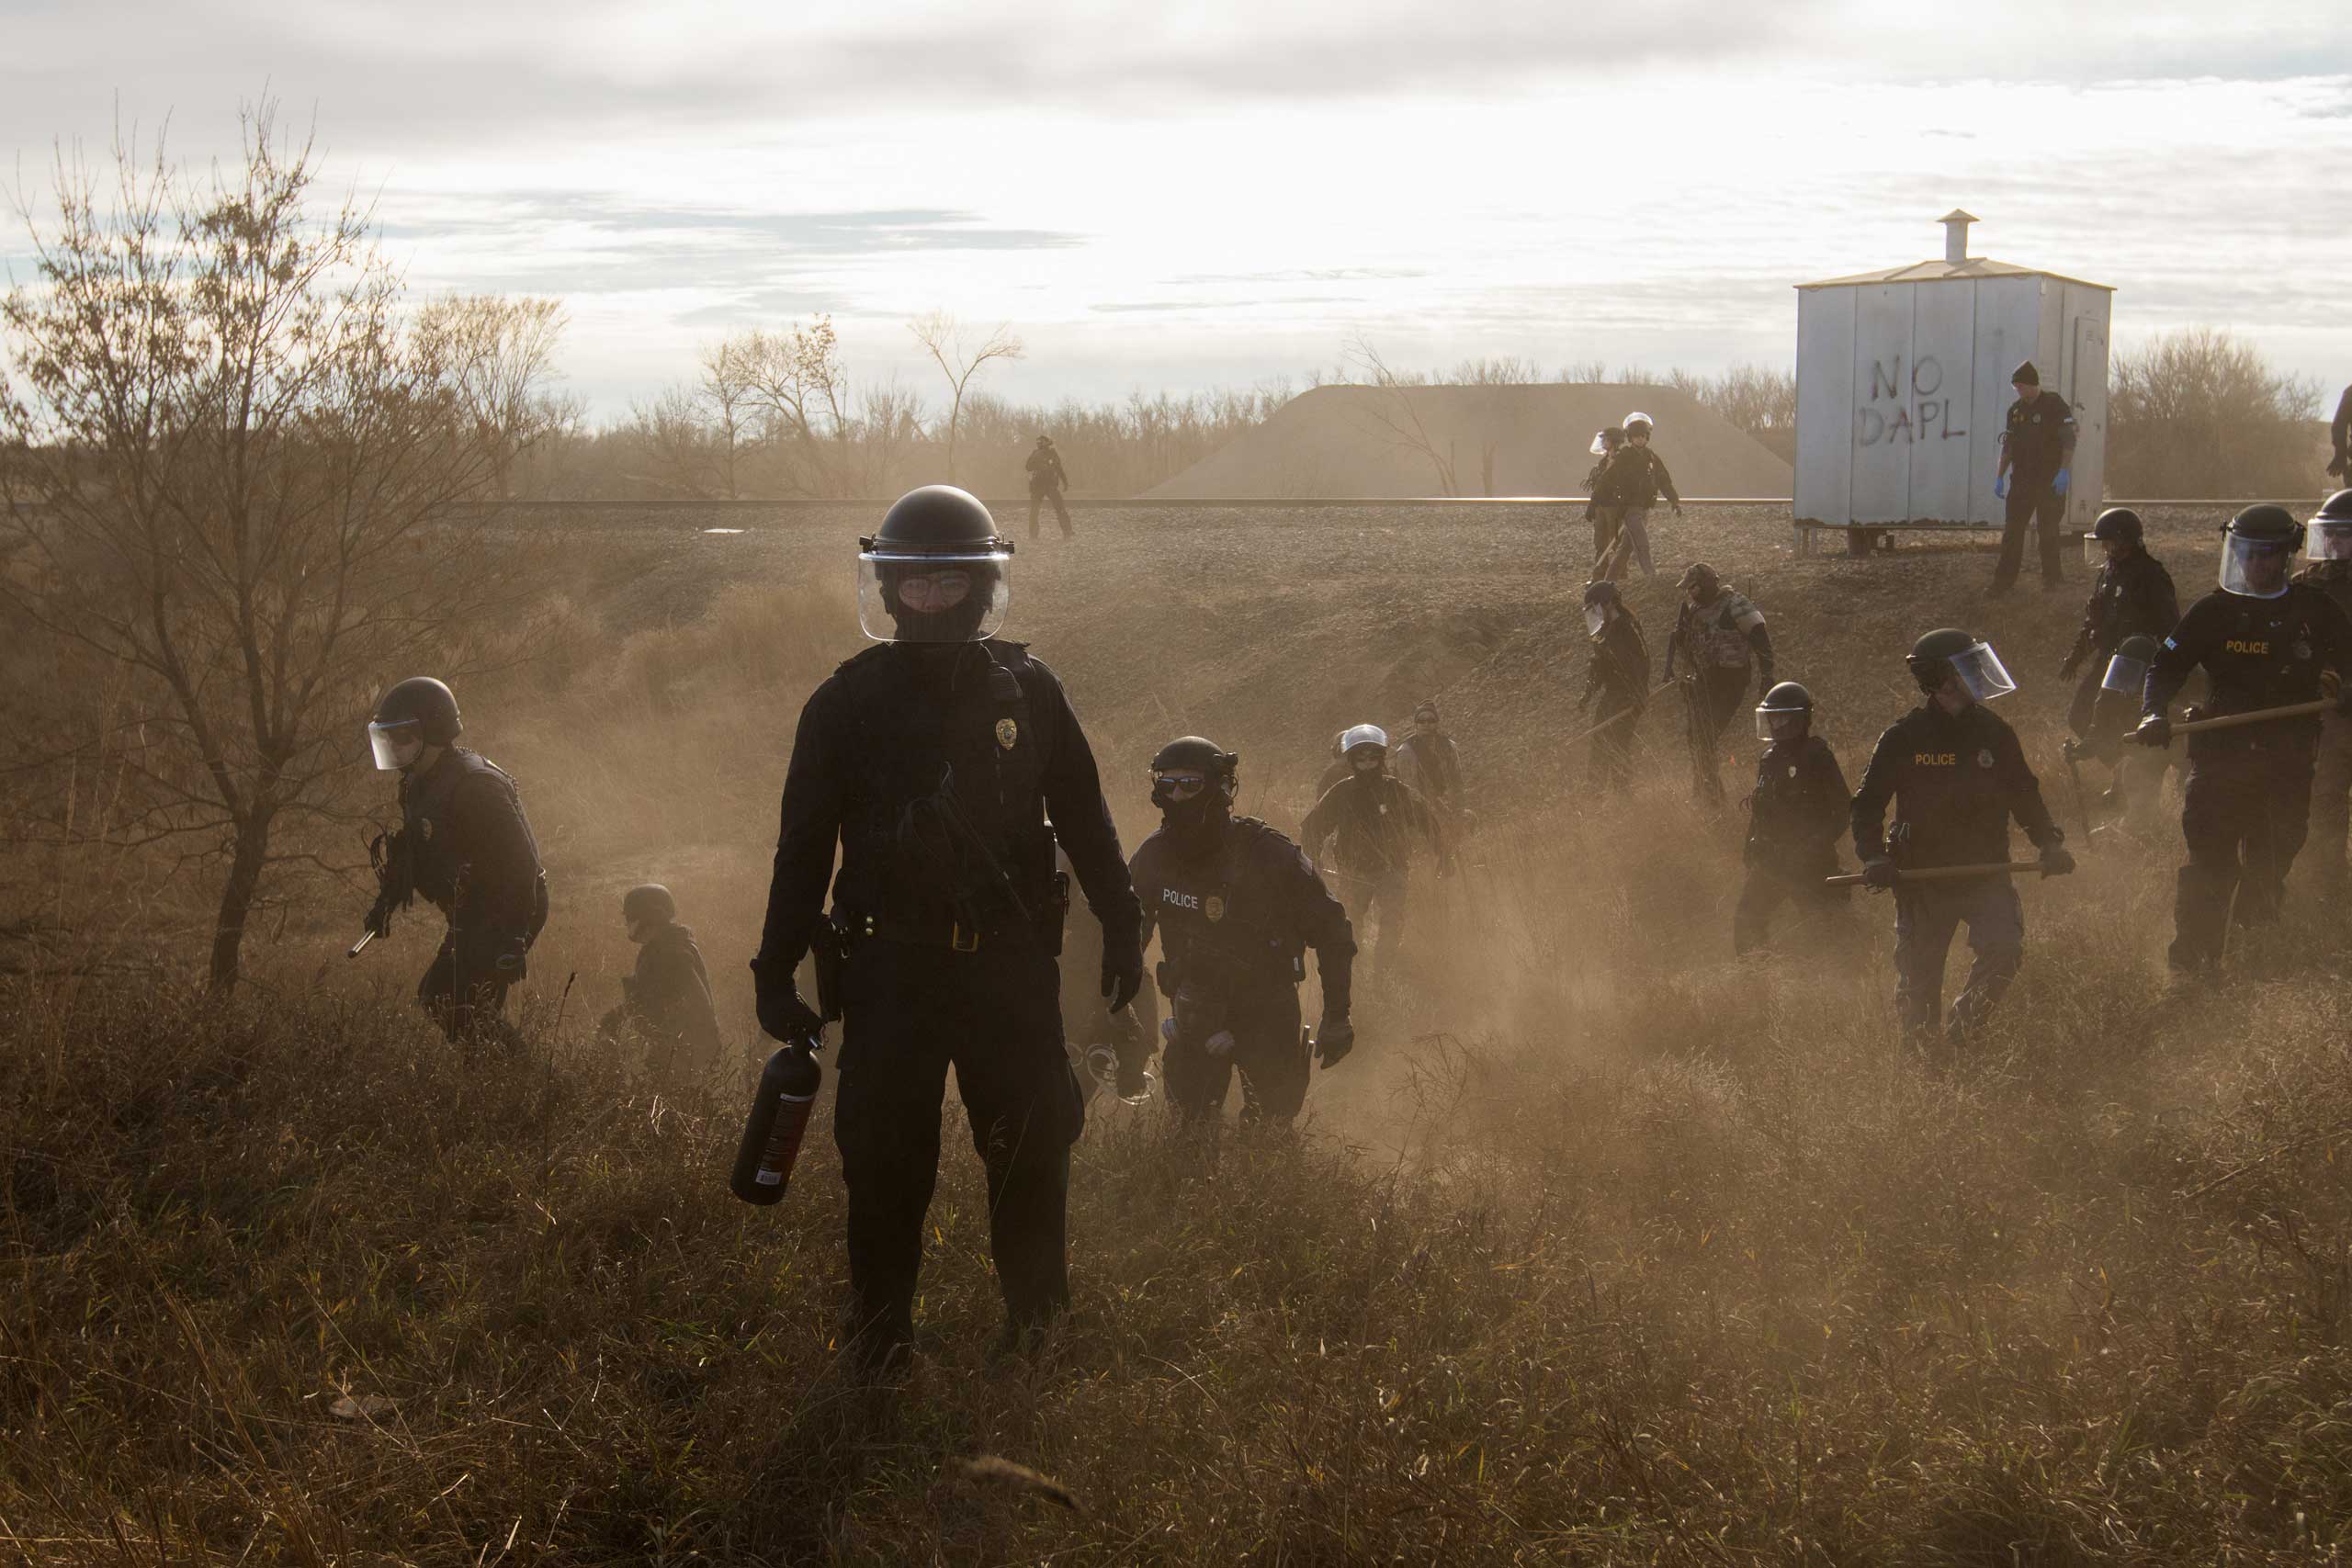 Morton County Sheriffs - Riot police clear marchers from a secondary road outside a Dakota Access Pipeline (DAPL) worker camp using rubber bullets, pepper spray, tasers and arrests. In other incidents they've employed militarized vehicles, water canons, tear gas and have been accused of using percussion grenades.